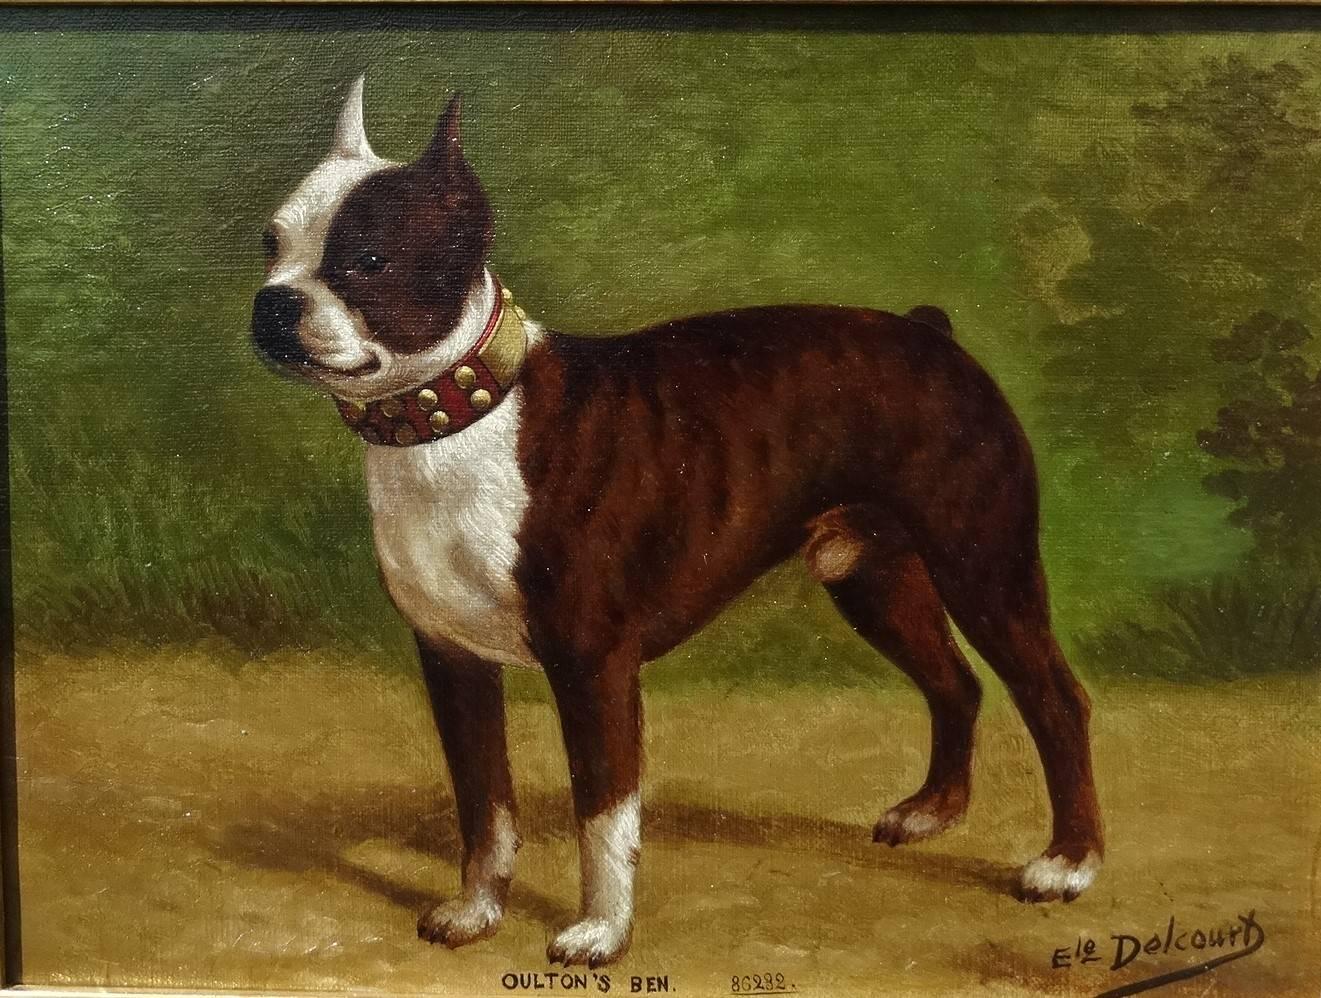 E. Delcourt Animal Painting - "American Staffordshire Bull Terrier"